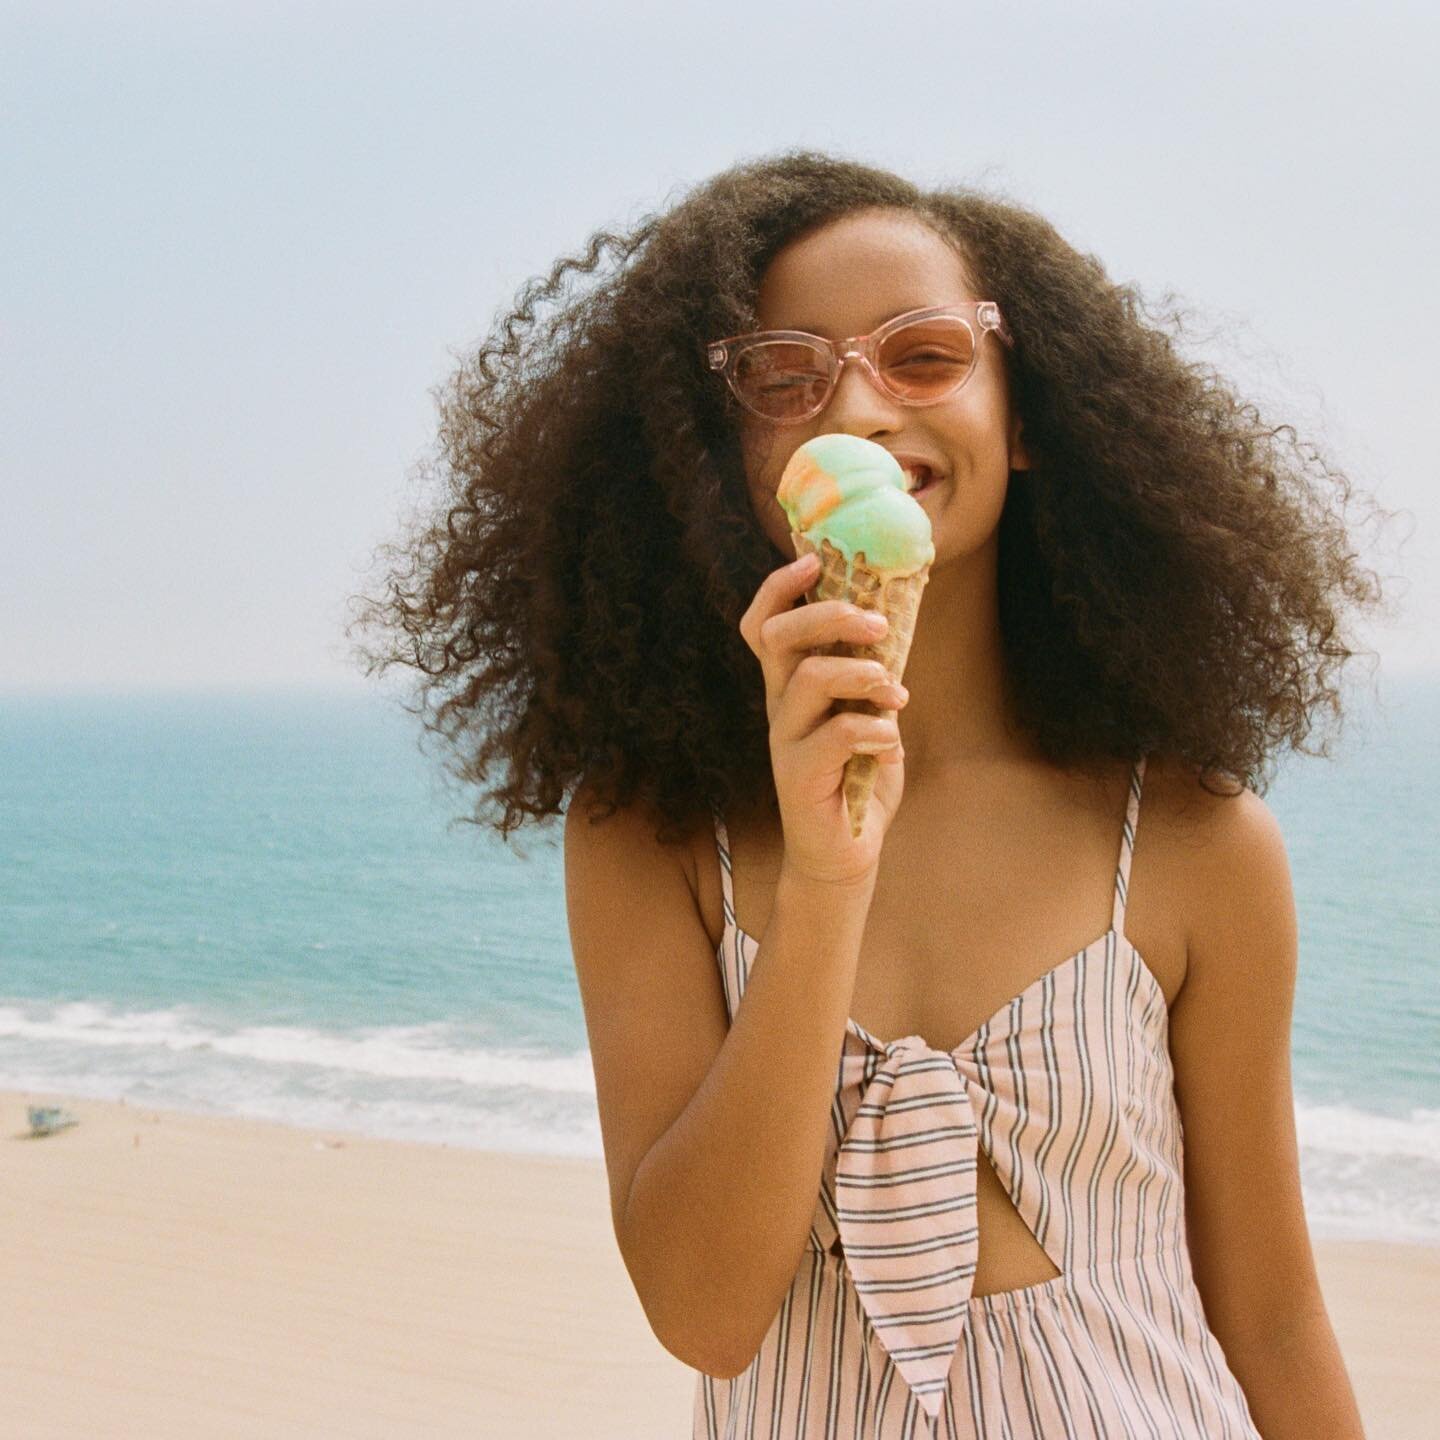 Summertime means ice cream time 🍦(Captured by @grahamdunn for the Palisades Village Campaign)